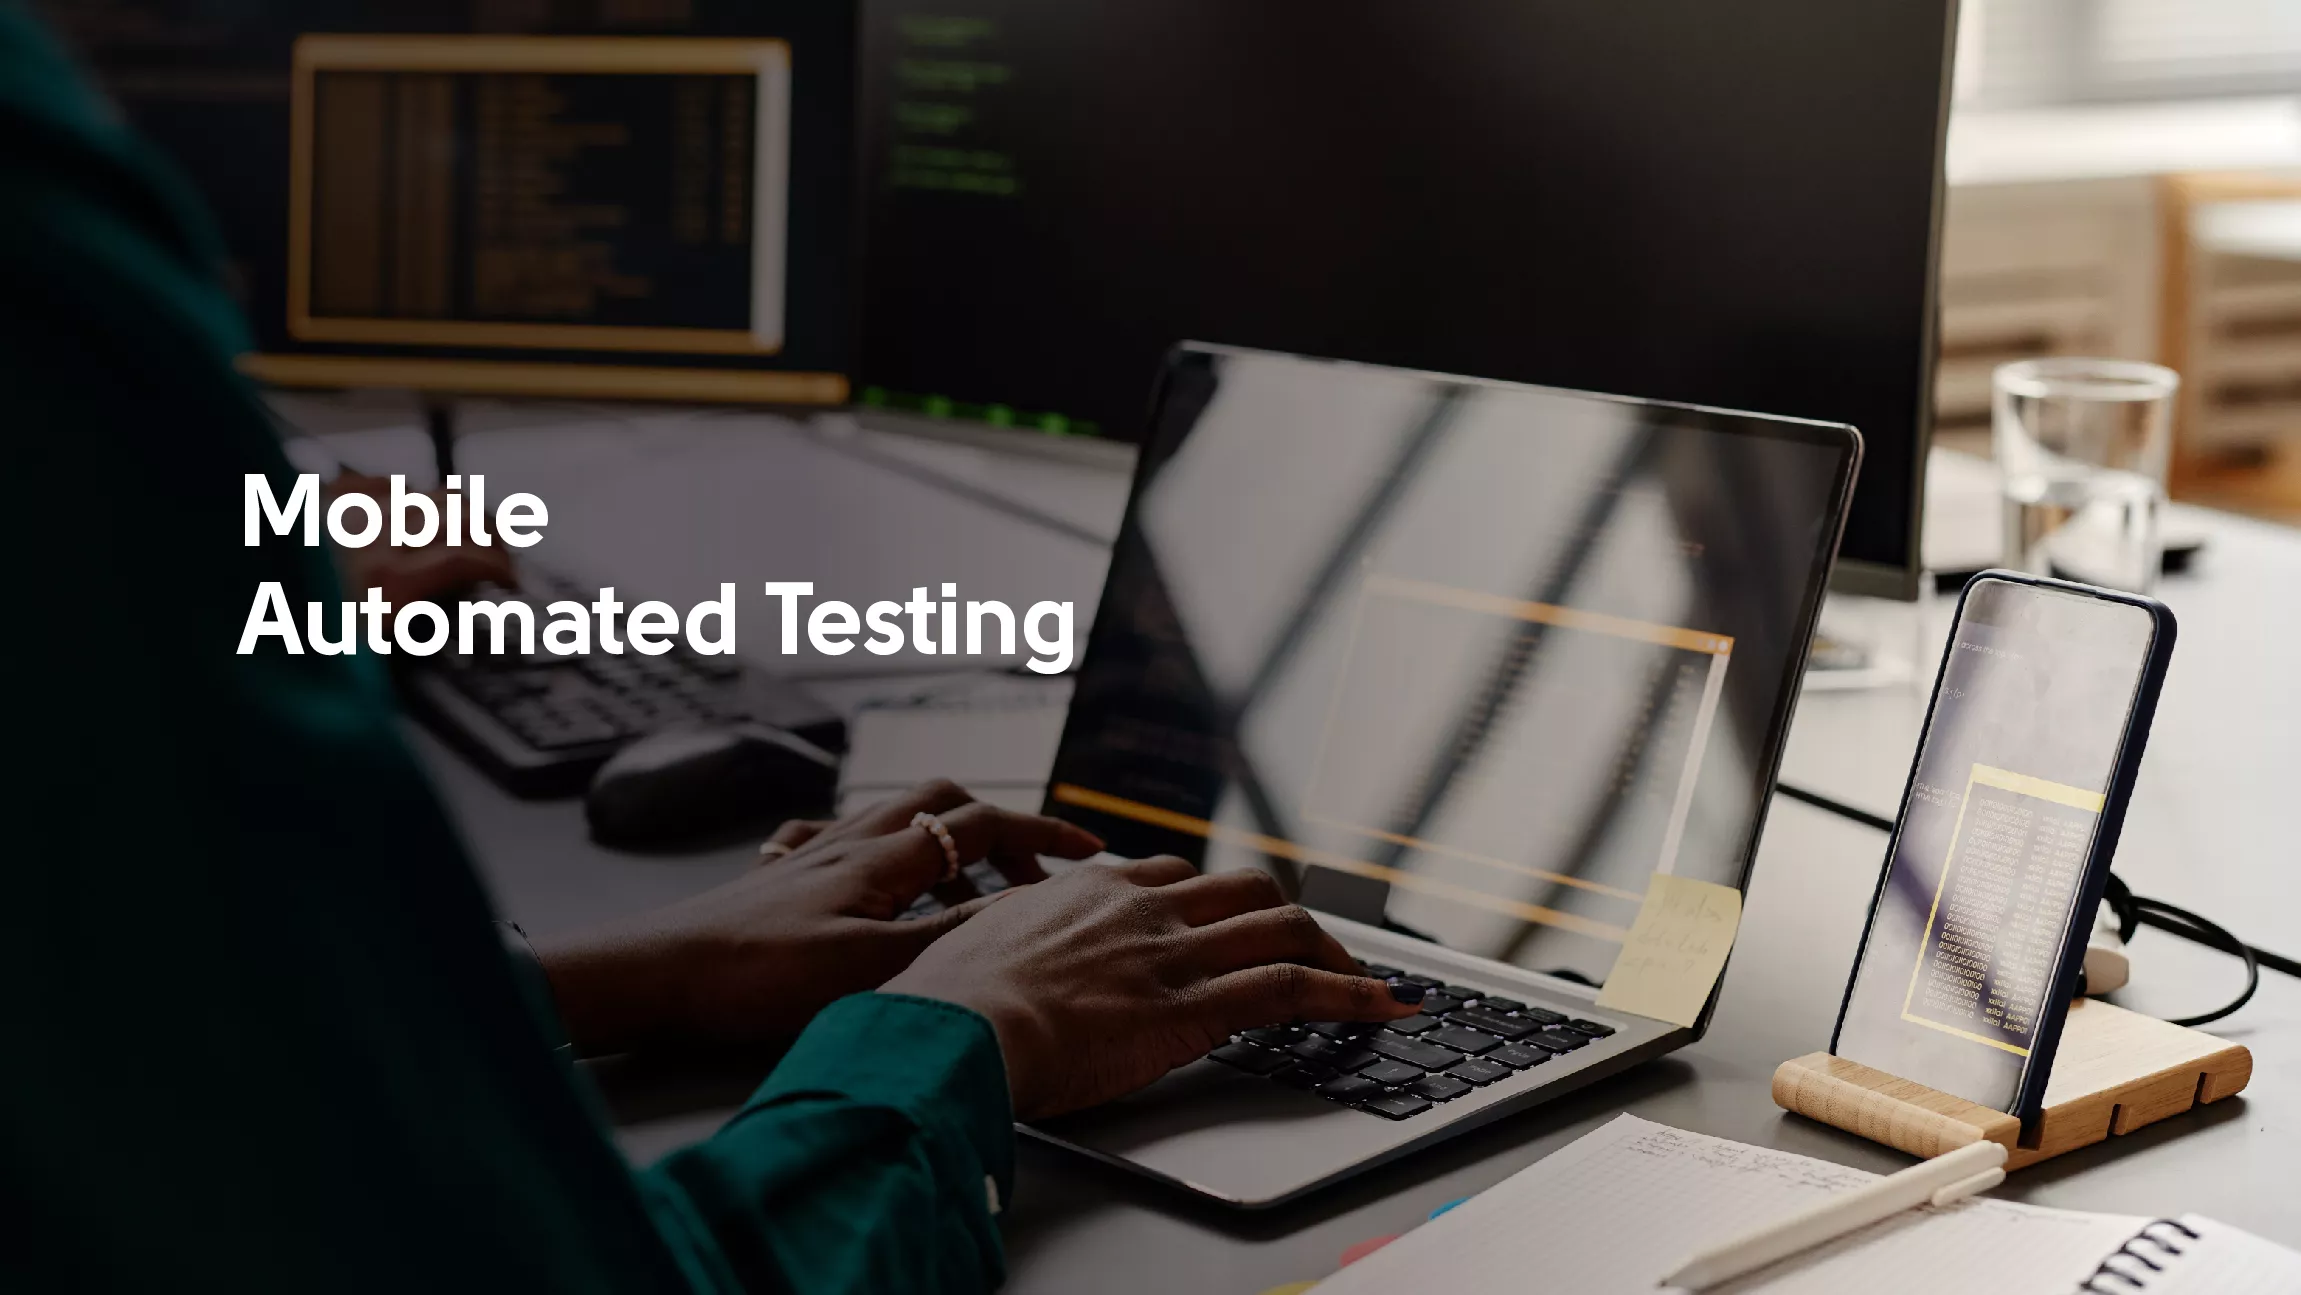 Mobile Automated Testing